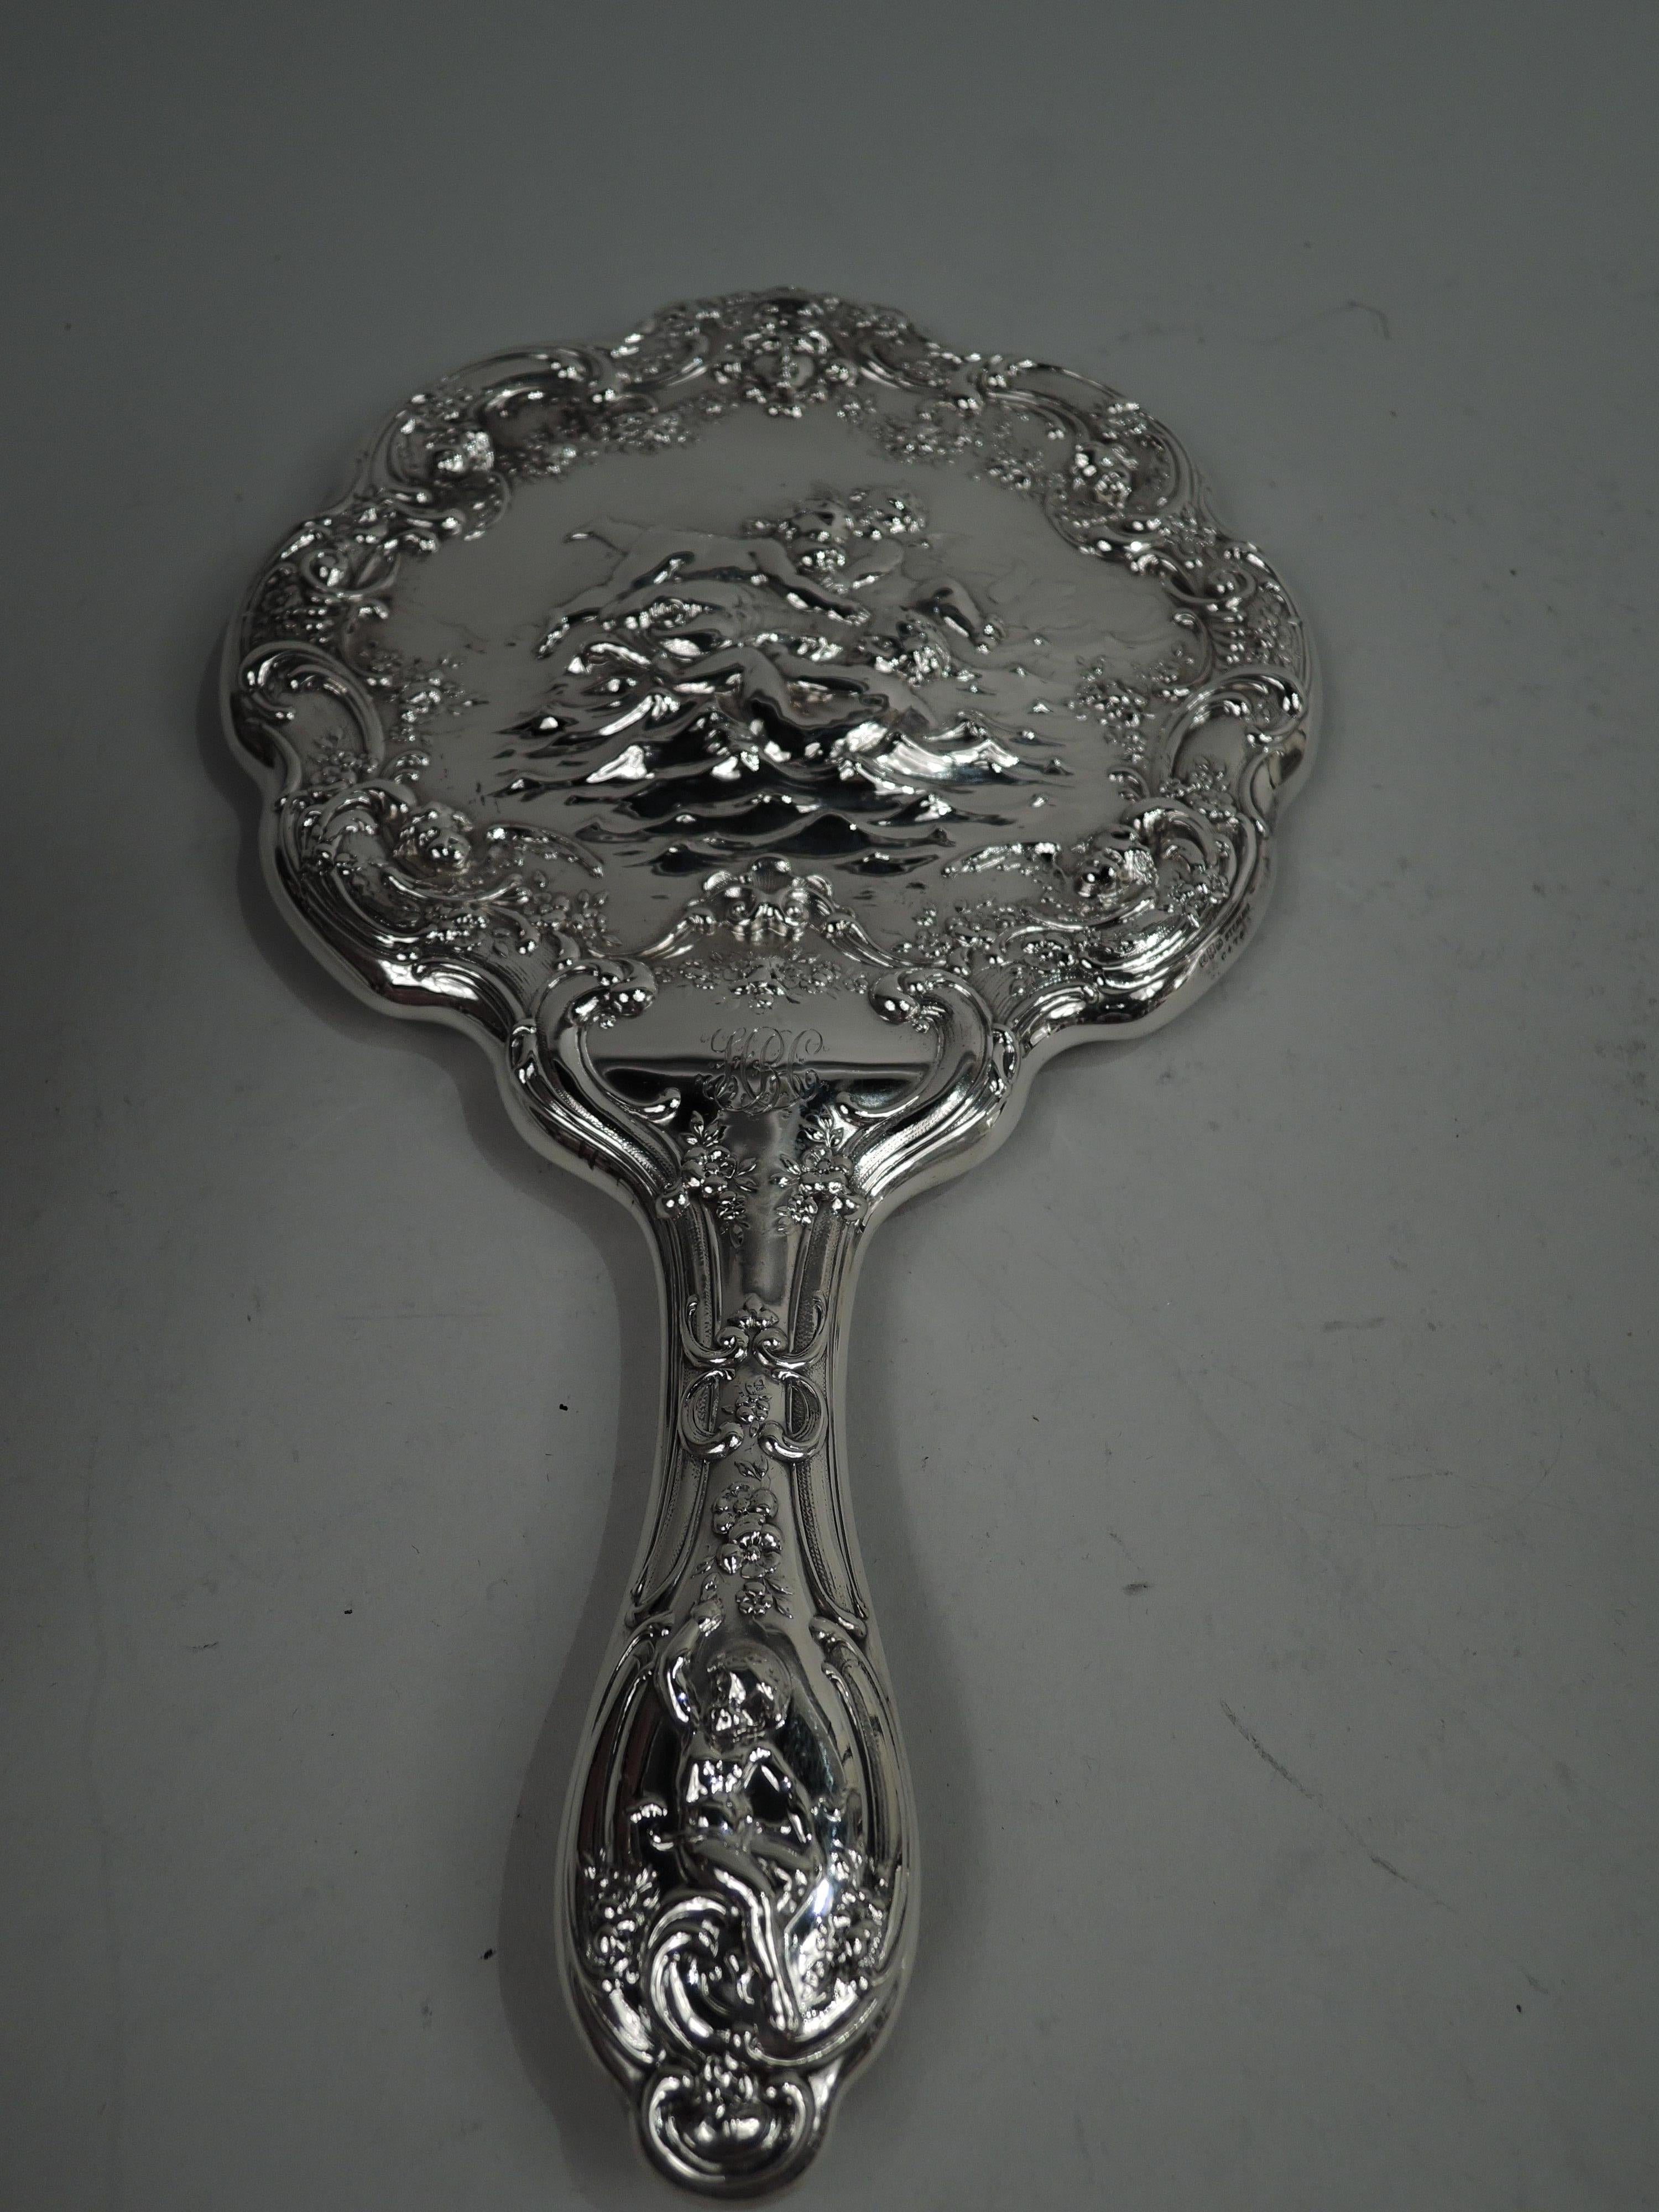 Edwardian Classical sterling silver vanity pair. Made by Gorham in Providence, ca 1900. This pair comprises hand mirror and hairbrush. Mirror has round scalloped frame and the brush has shaped oval frame. Embossed ornament with chubby, naked cherubs